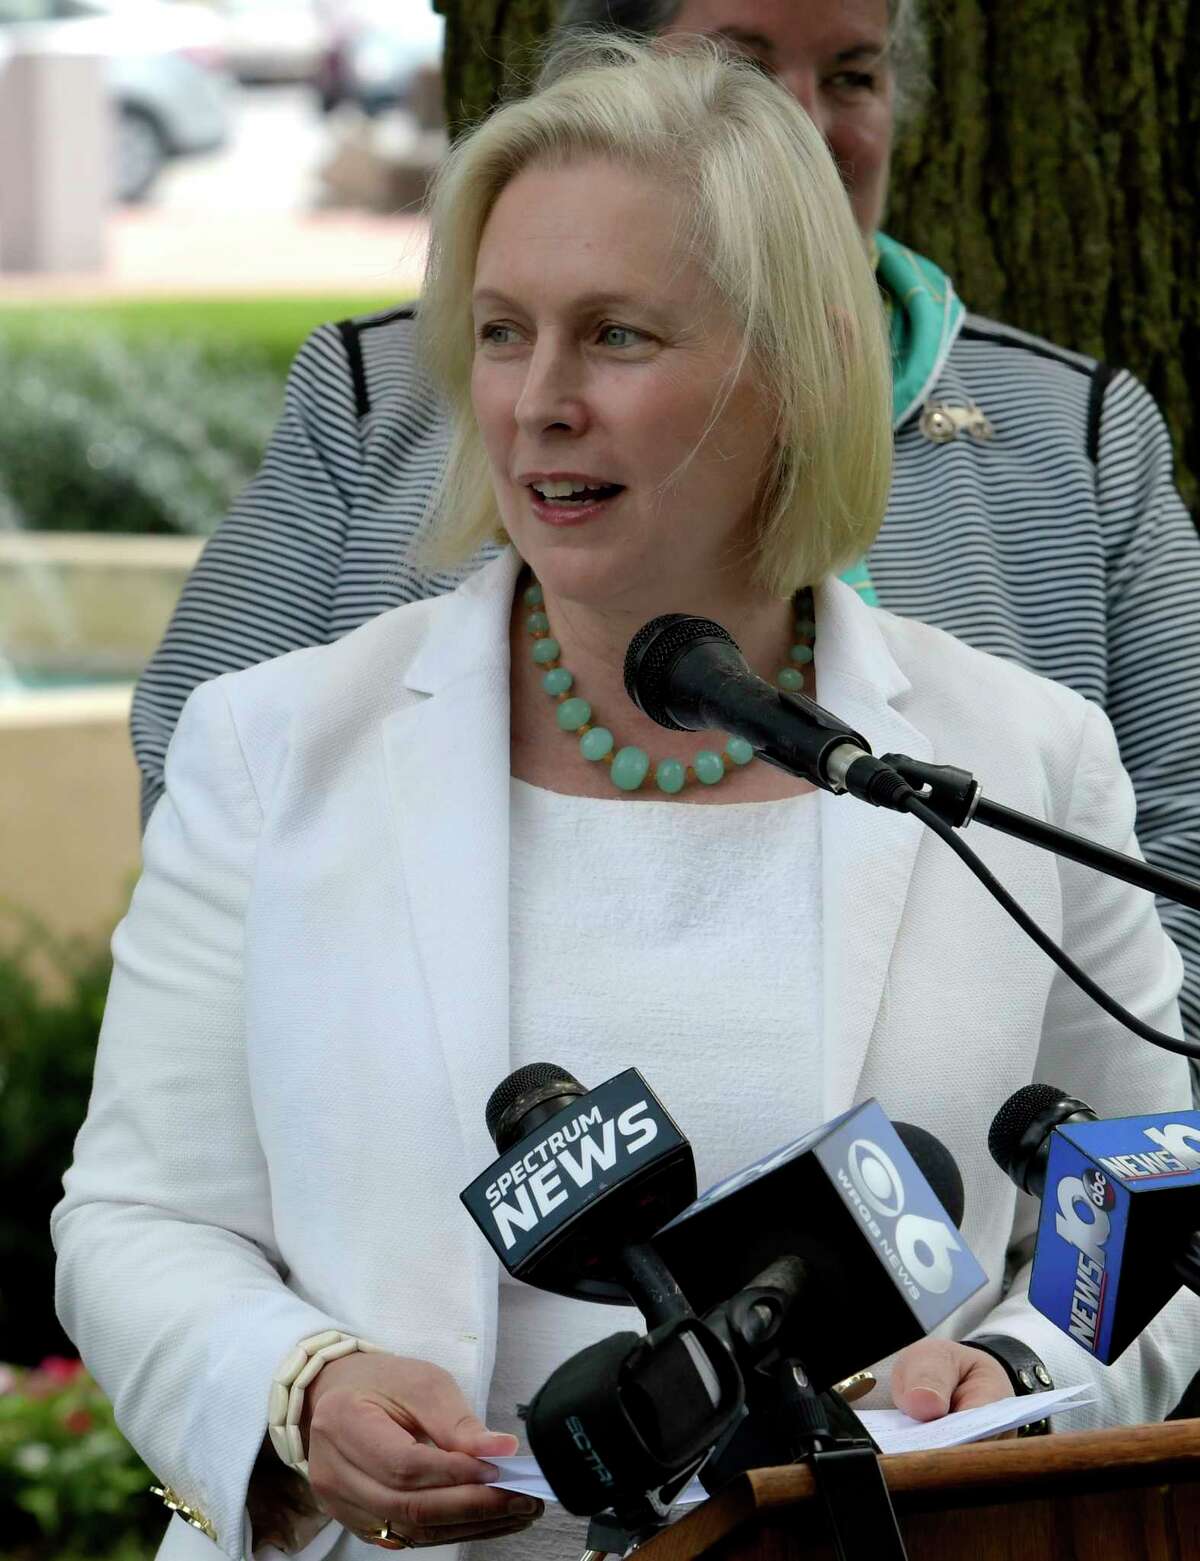 U.S. Senator Kirsten Gillibrand held a press conference in Juckett Park Monday July 17, 2017 in Hudson Falls, N.Y. to announce the Trump Administration has begun to establish the Tick-Borne Disease Working Group, a key provision in her Lyme and Tick-Borne Disease Prevention, Education, and Research Act, which became law as a part of the 21st Century Cures Act in December 2016. The Tick-Borne Disease Working Group will review all federal activities related to tick-borne diseases, including Lyme disease, and will function as a Federal Advisory Committee to the Department of Health and Human Services. (Skip Dickstein/Times Union)